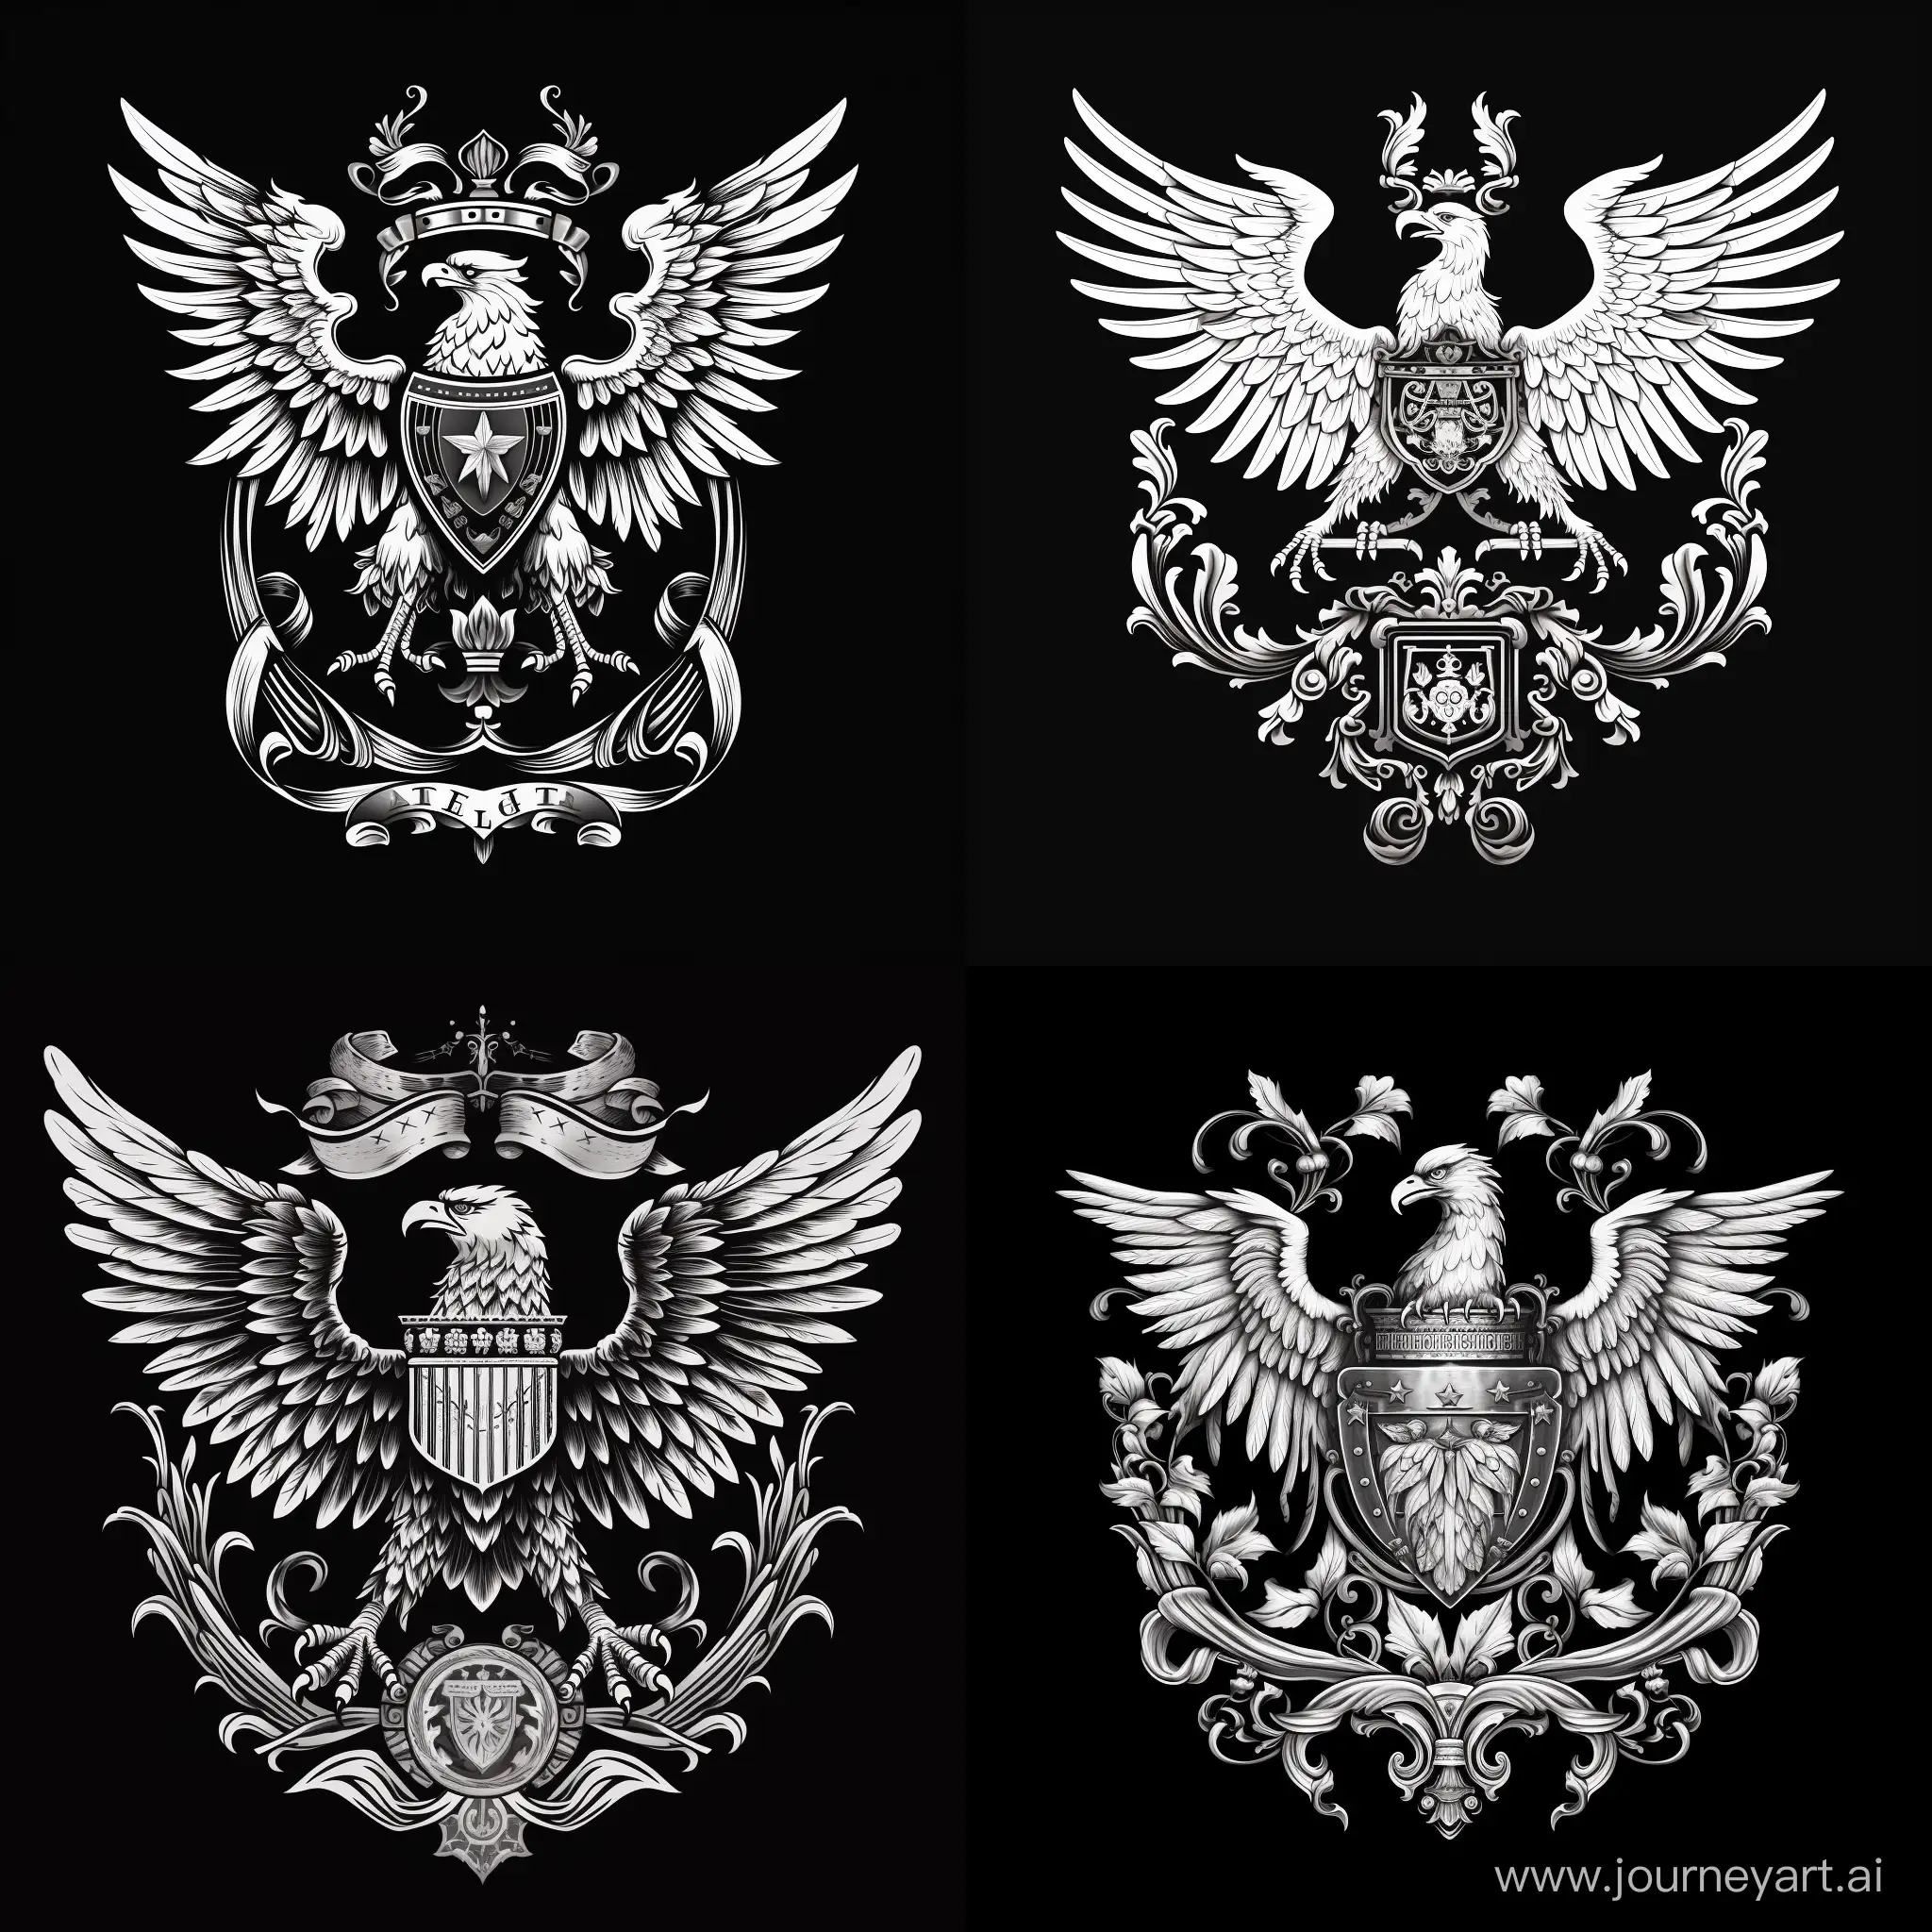 Minimalistic-Black-and-White-Coat-of-Arms-with-DoubleHeaded-Eagle-and-Centered-Land